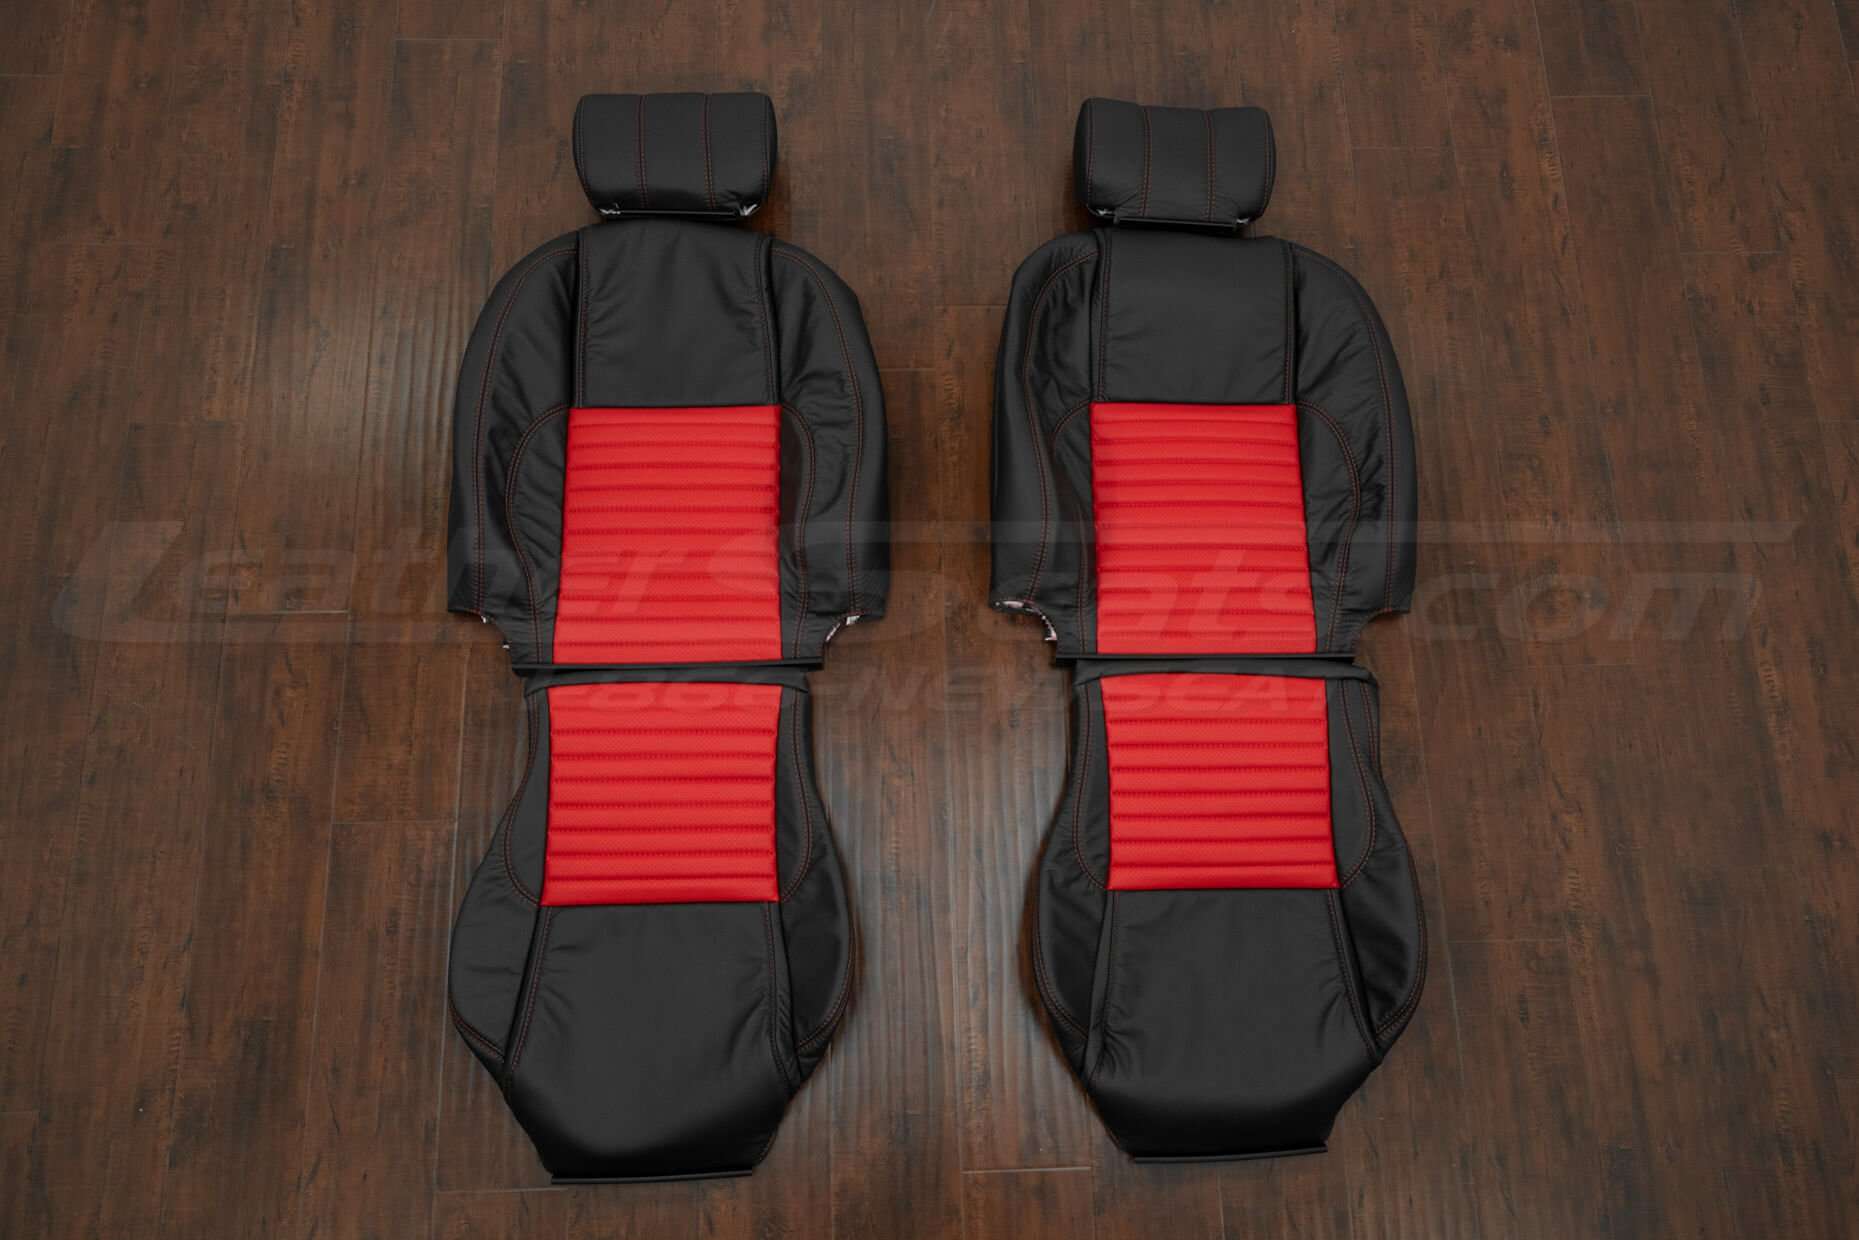 2002-2005 Ford Thunderbird Leather Seat Upholstery Kit - Black/Bright Red - Front seat upholstery